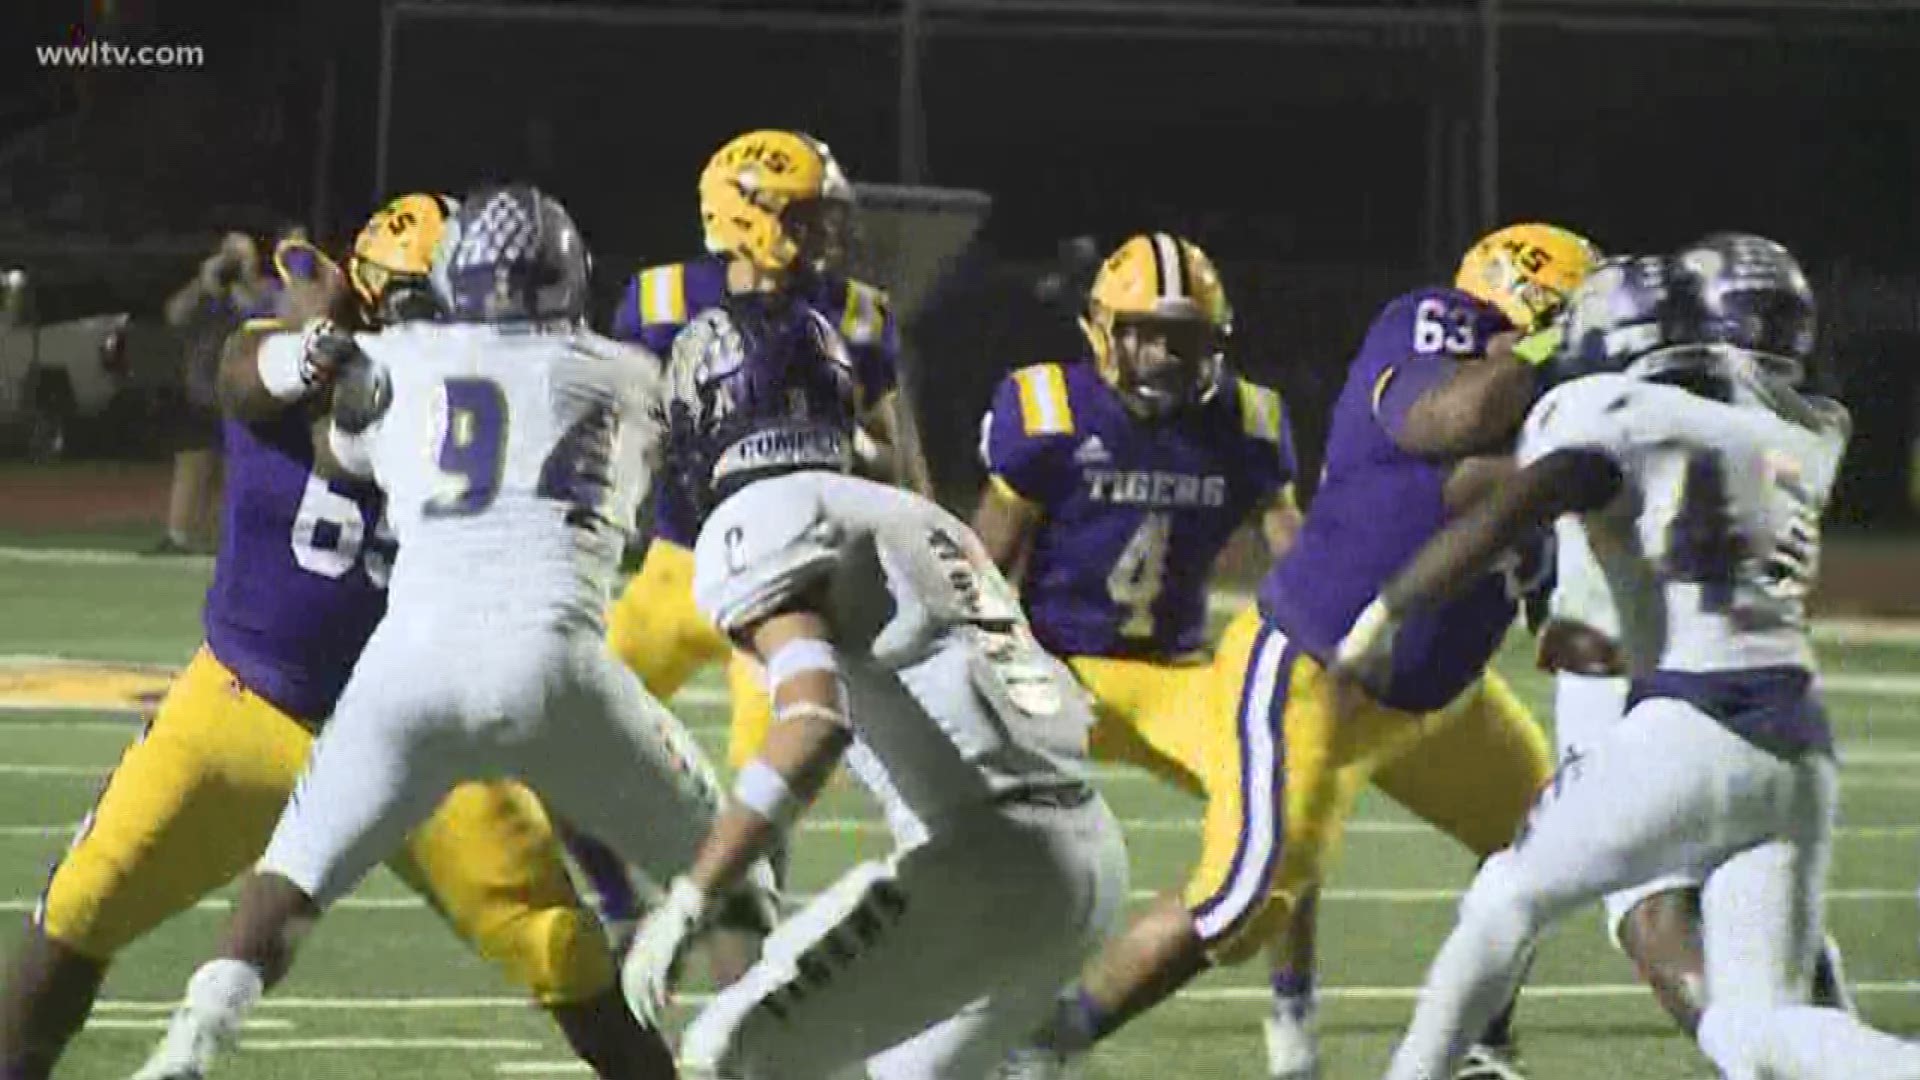 Hahnville defeated Thibodaux Friday night in a battle of previous unbeatens on the prep gridiron.